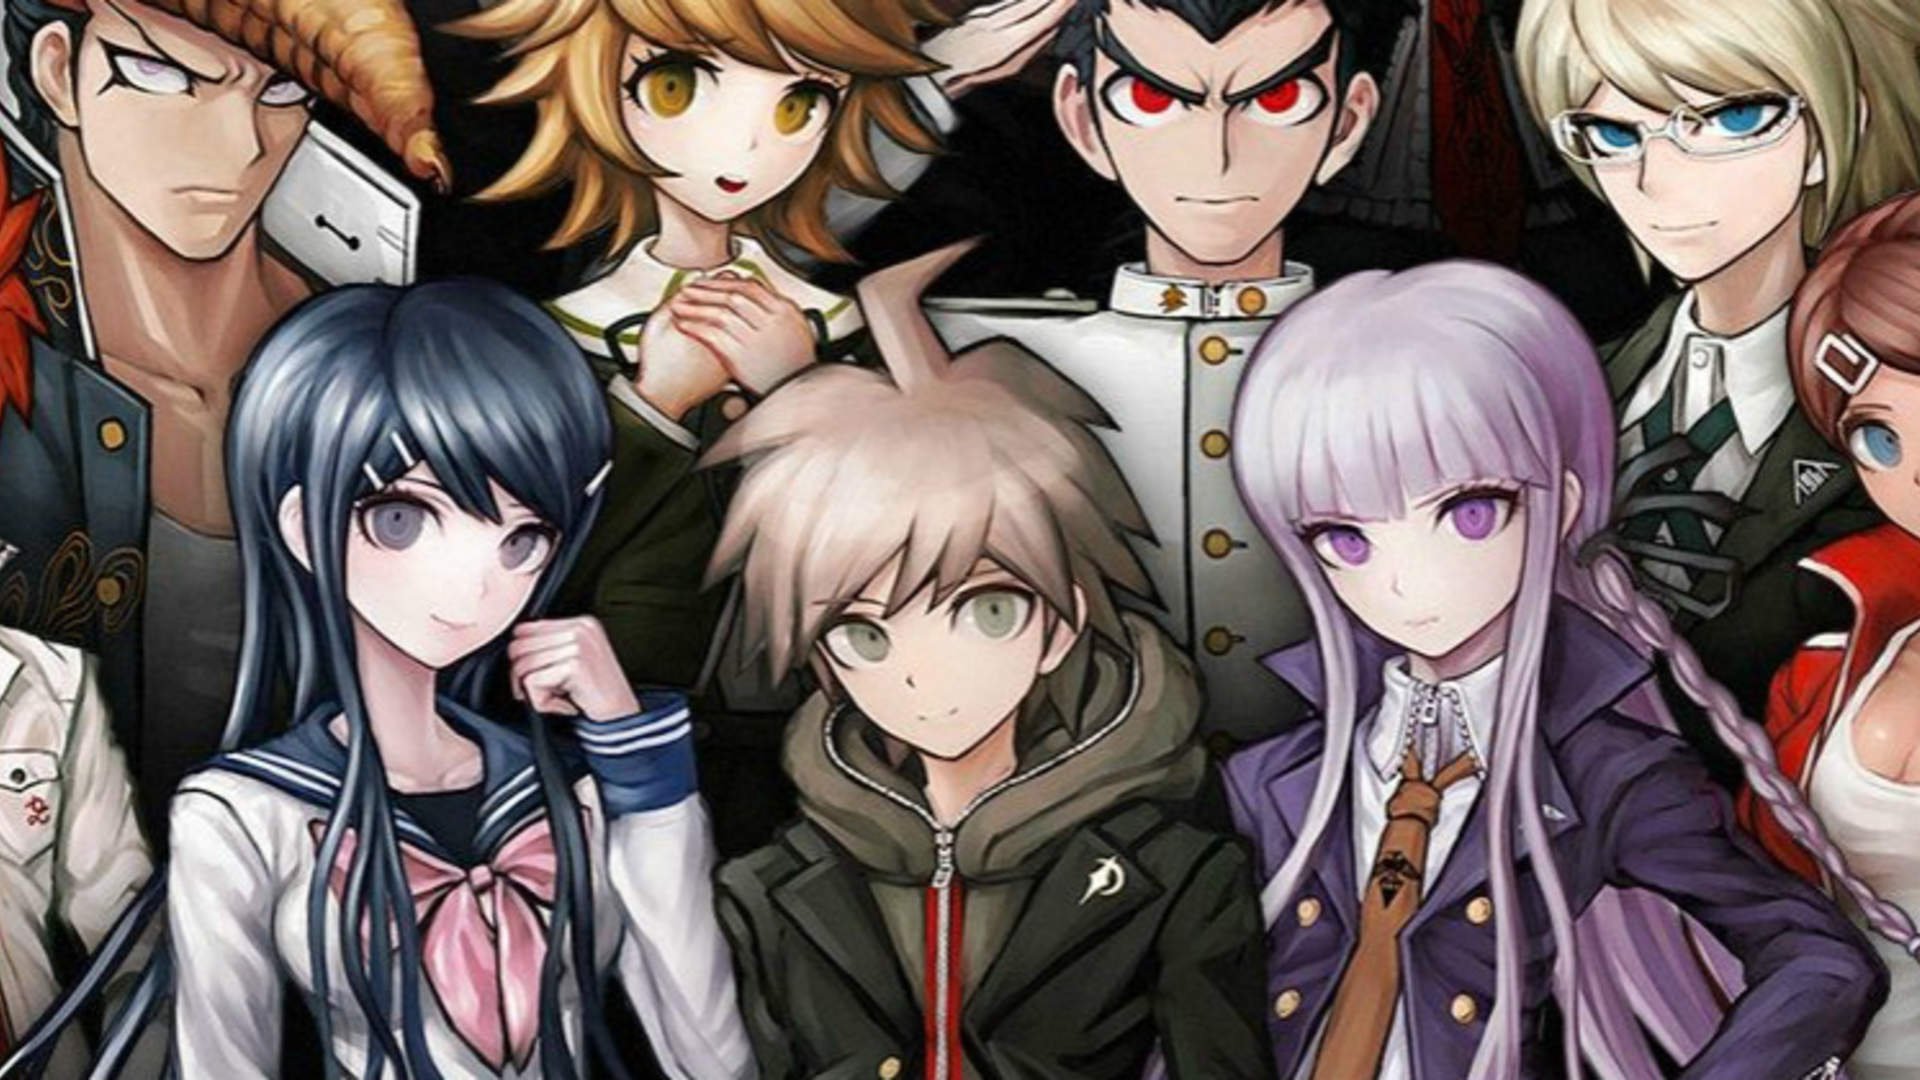 Danganronpa Series to Celebrate 10th Anniversary with Monthly News